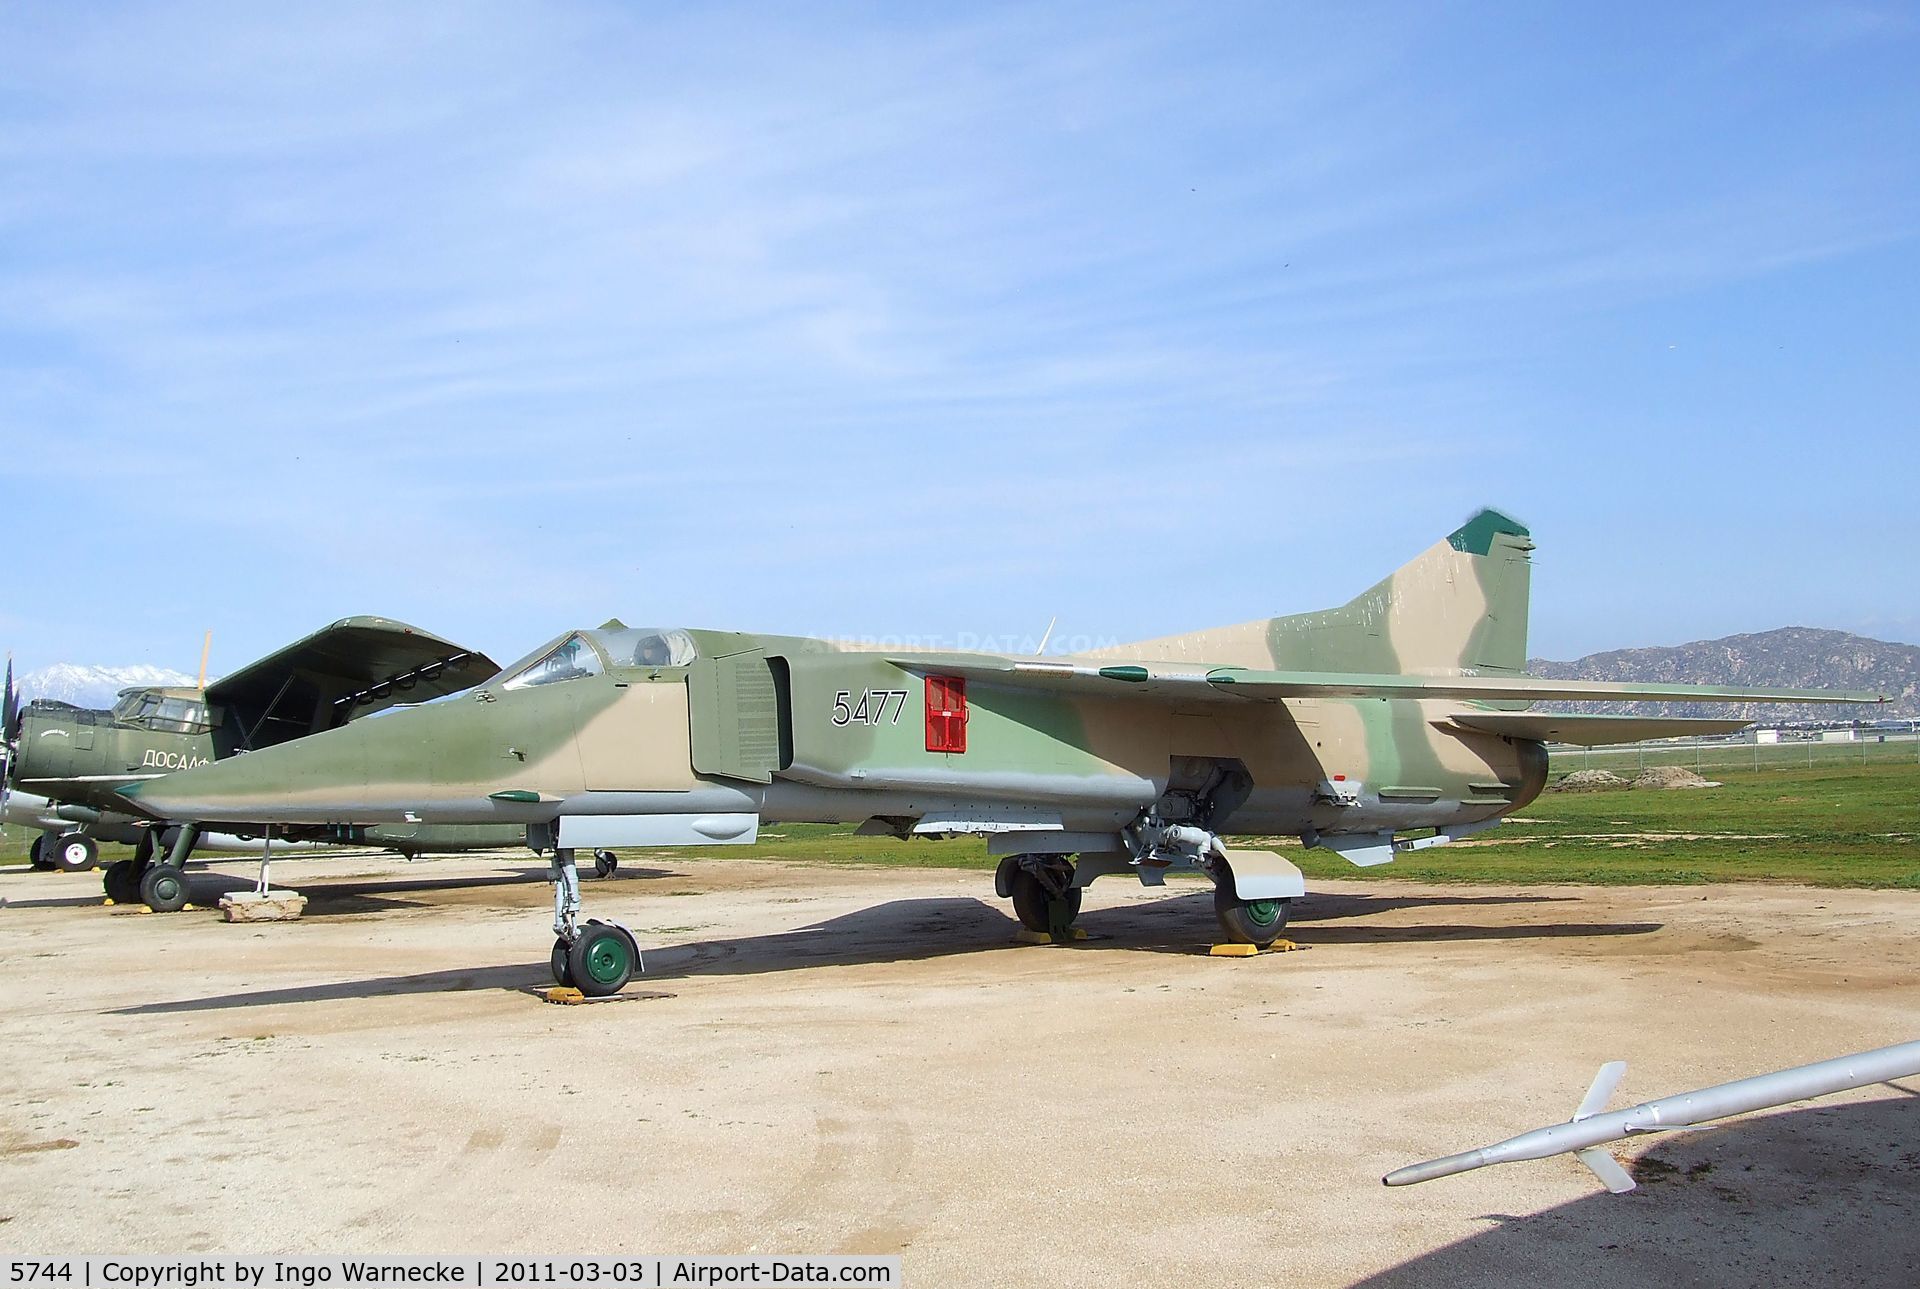 5744, Mikoyan-Gurevich MiG-23BN C/N 0393215744, Mikoyan i Gurevich MiG-23BN FLOGGER-H at the March Field Air Museum, Riverside CA